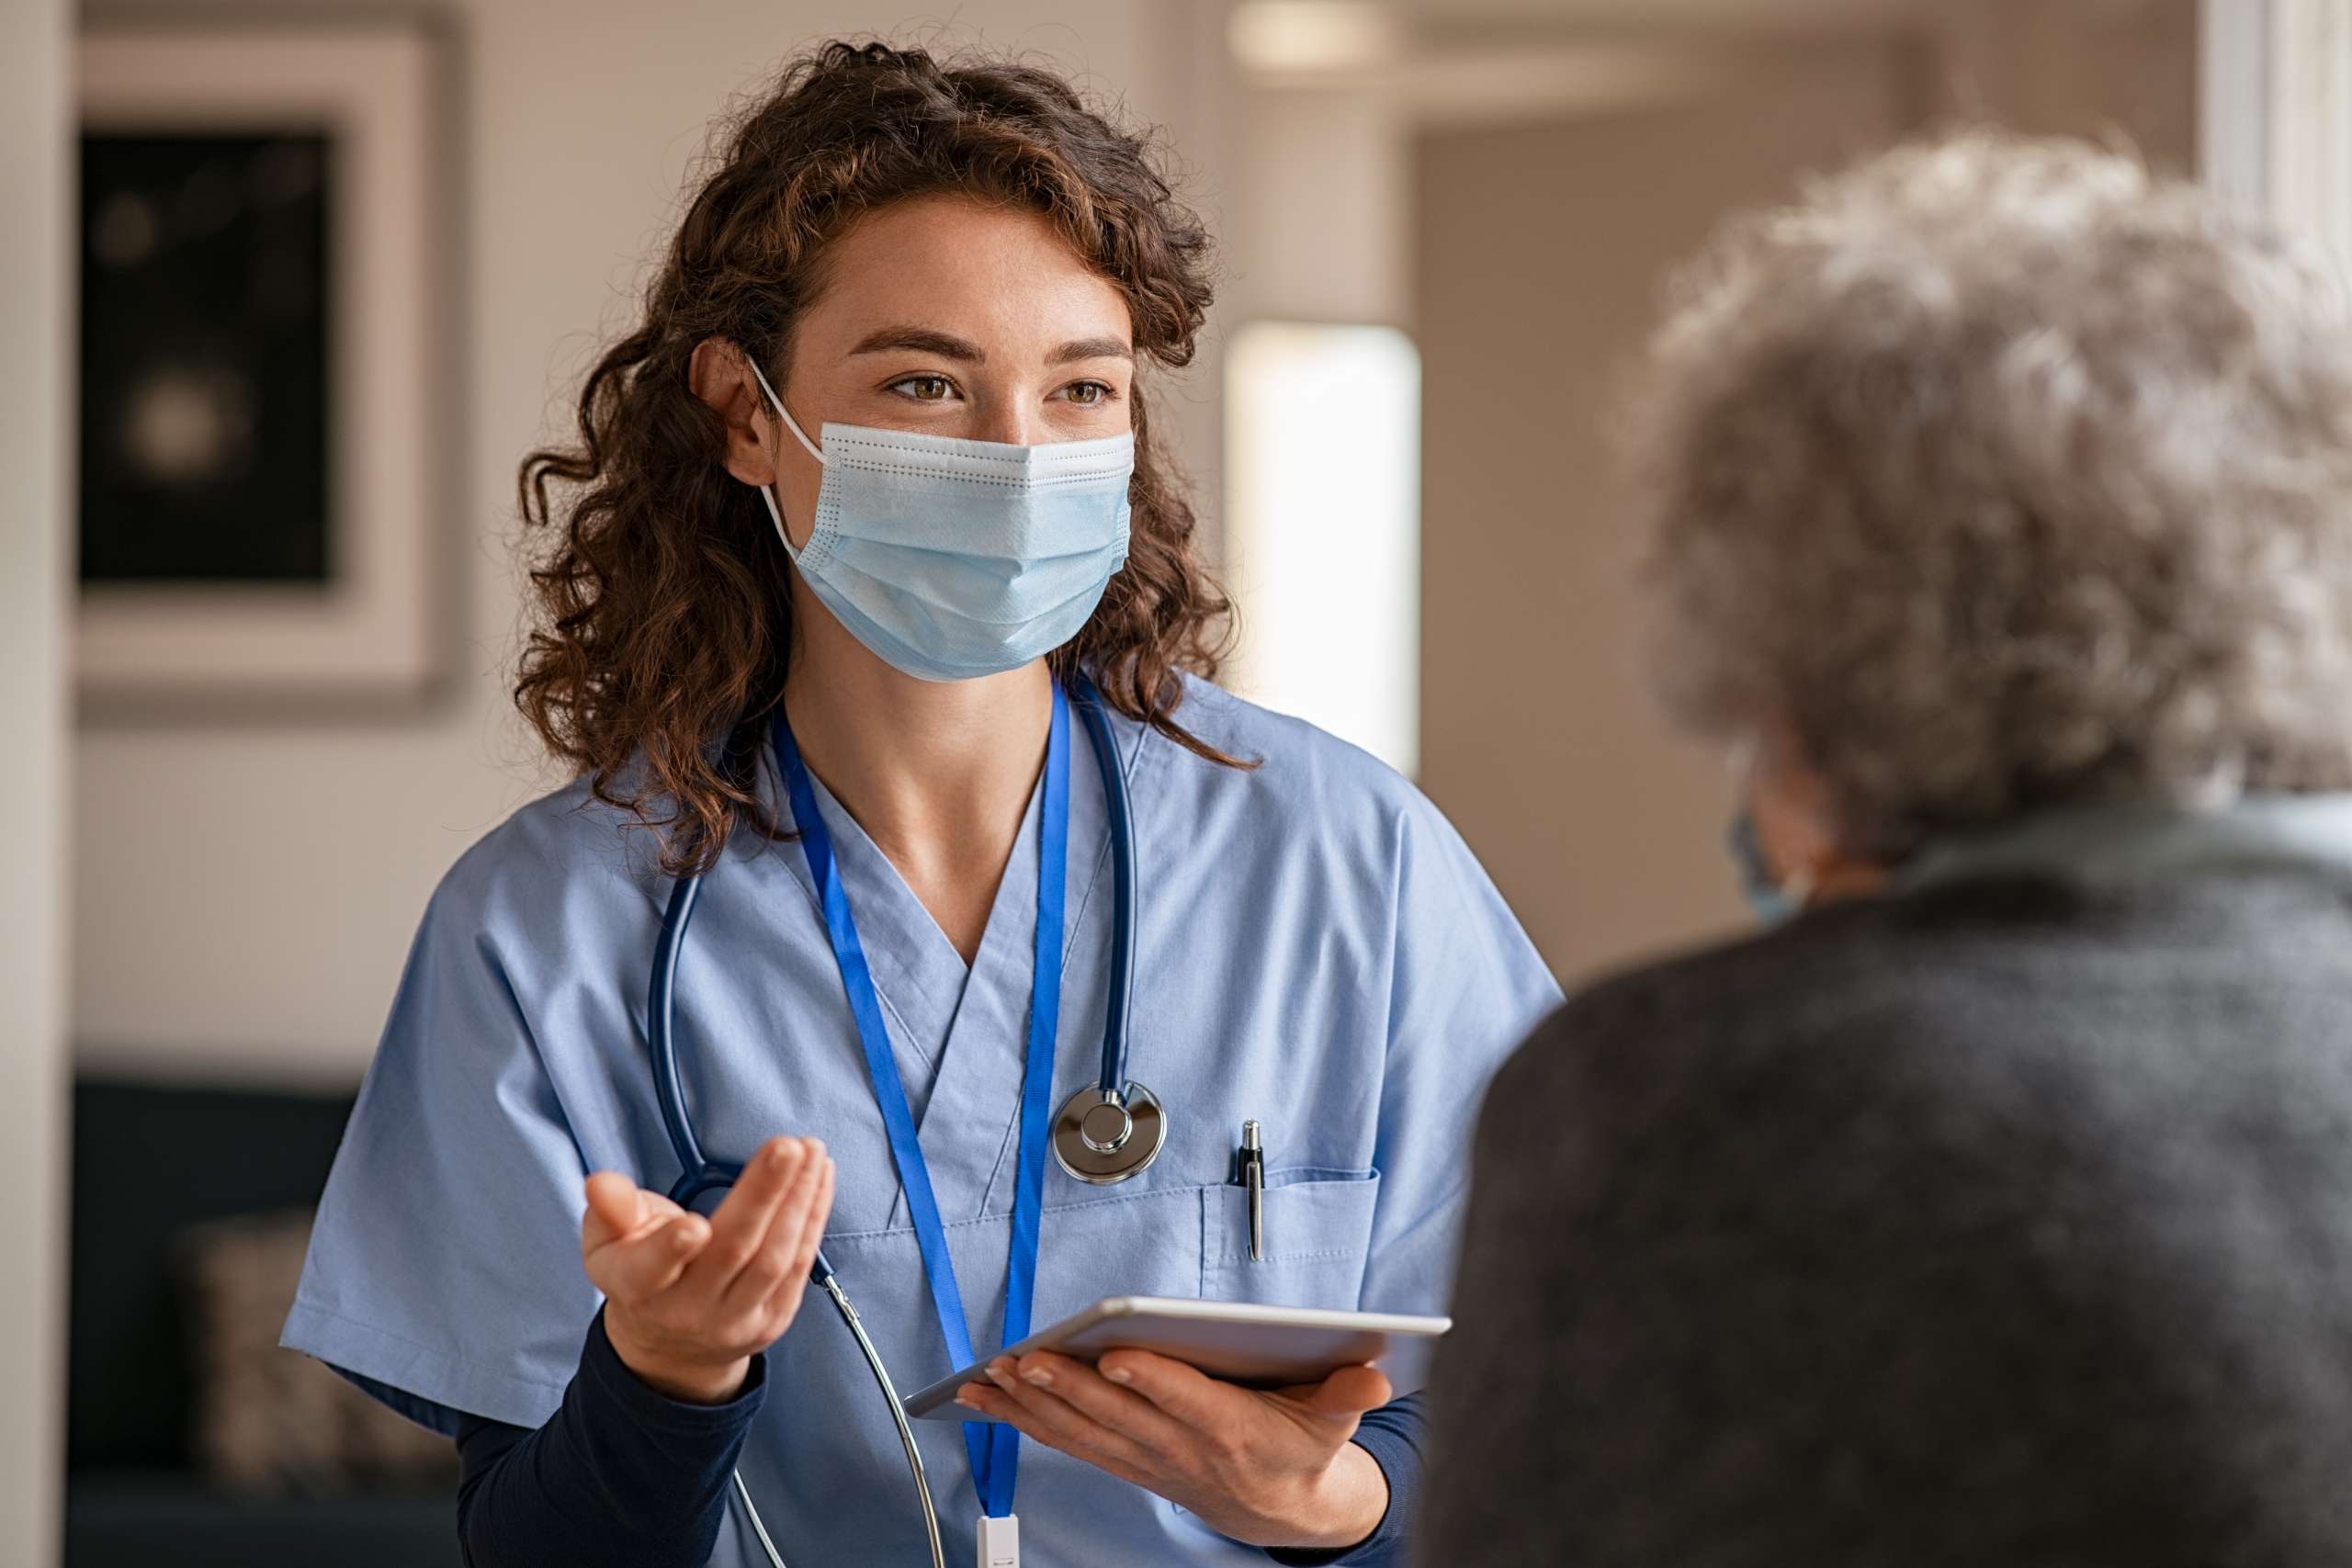 A nurse visits senior woman with surgical mask